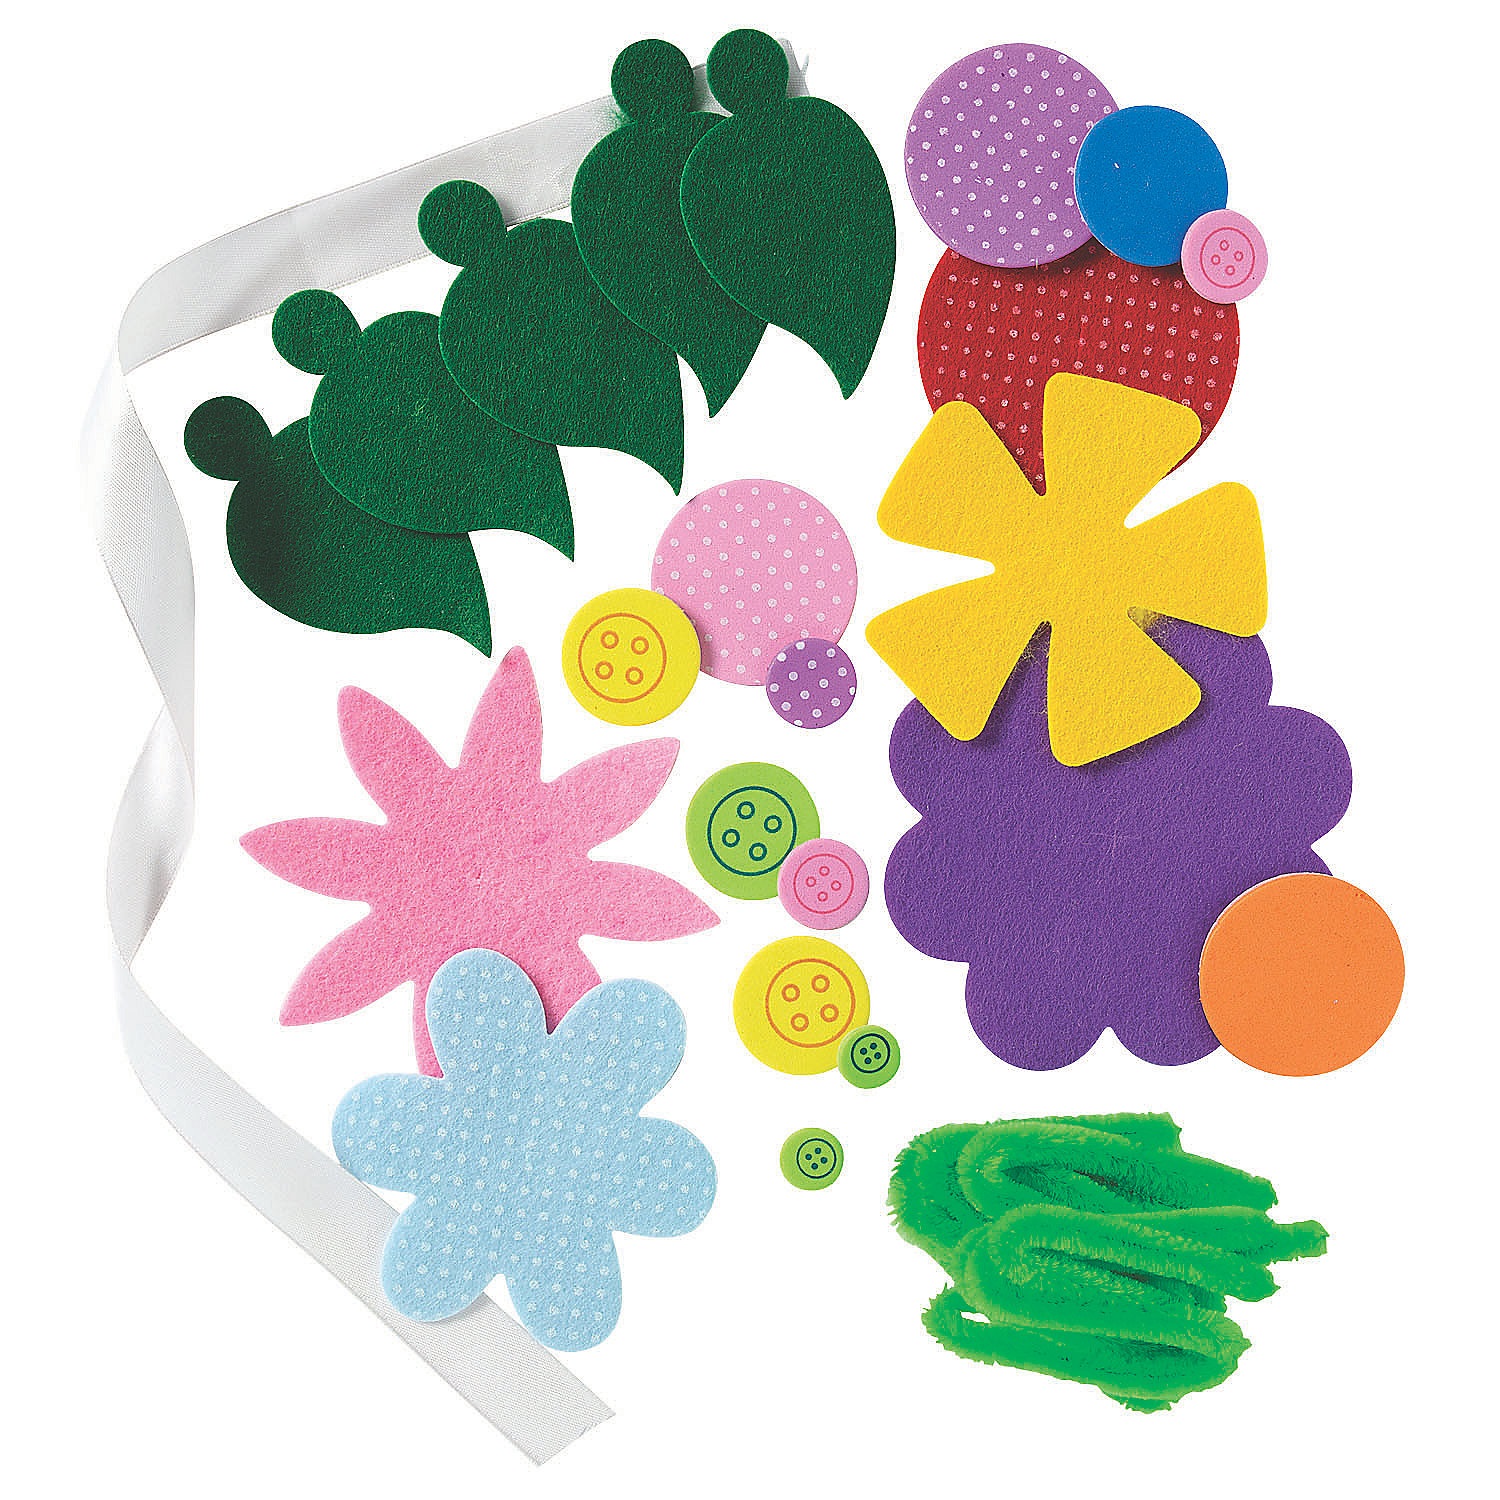 self-adhesive-flower-bouquet-craft-kit-makes-12_48_6520-a01